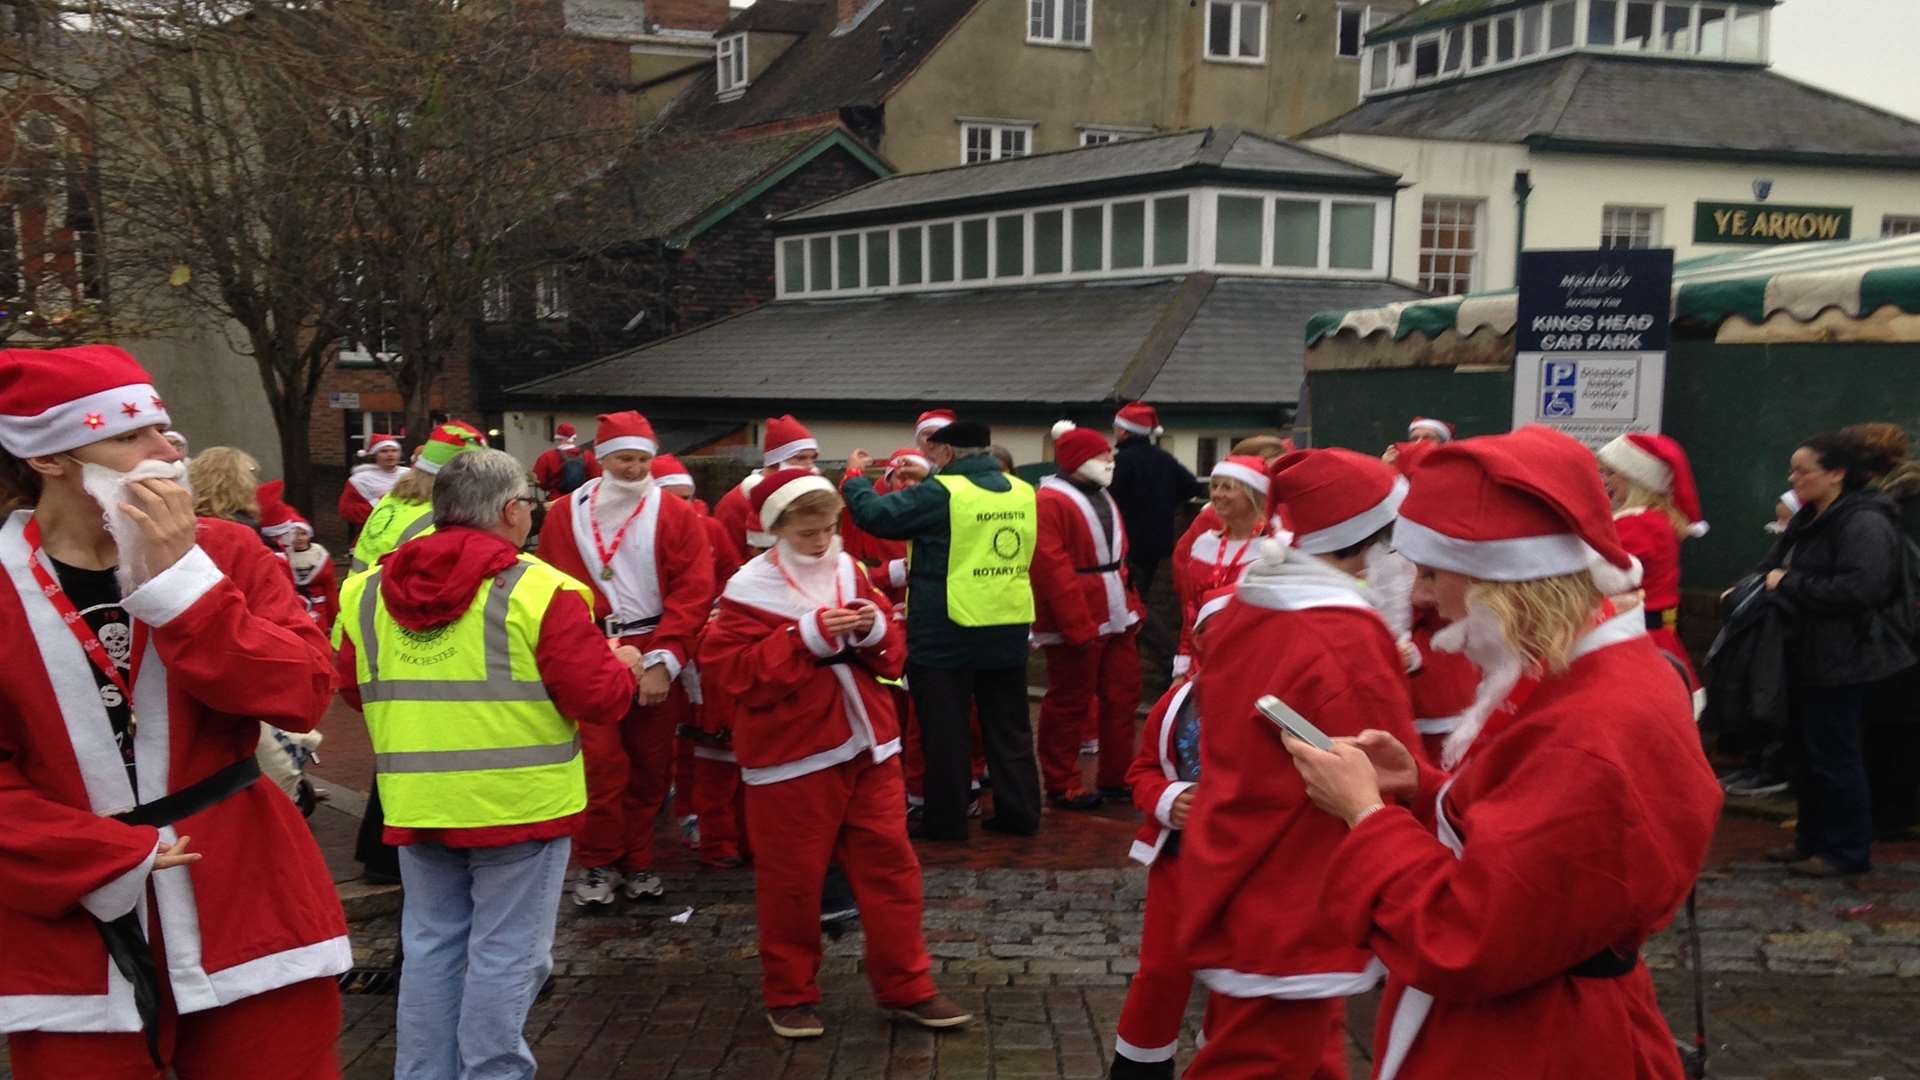 Some of the first Santas over the finish line.